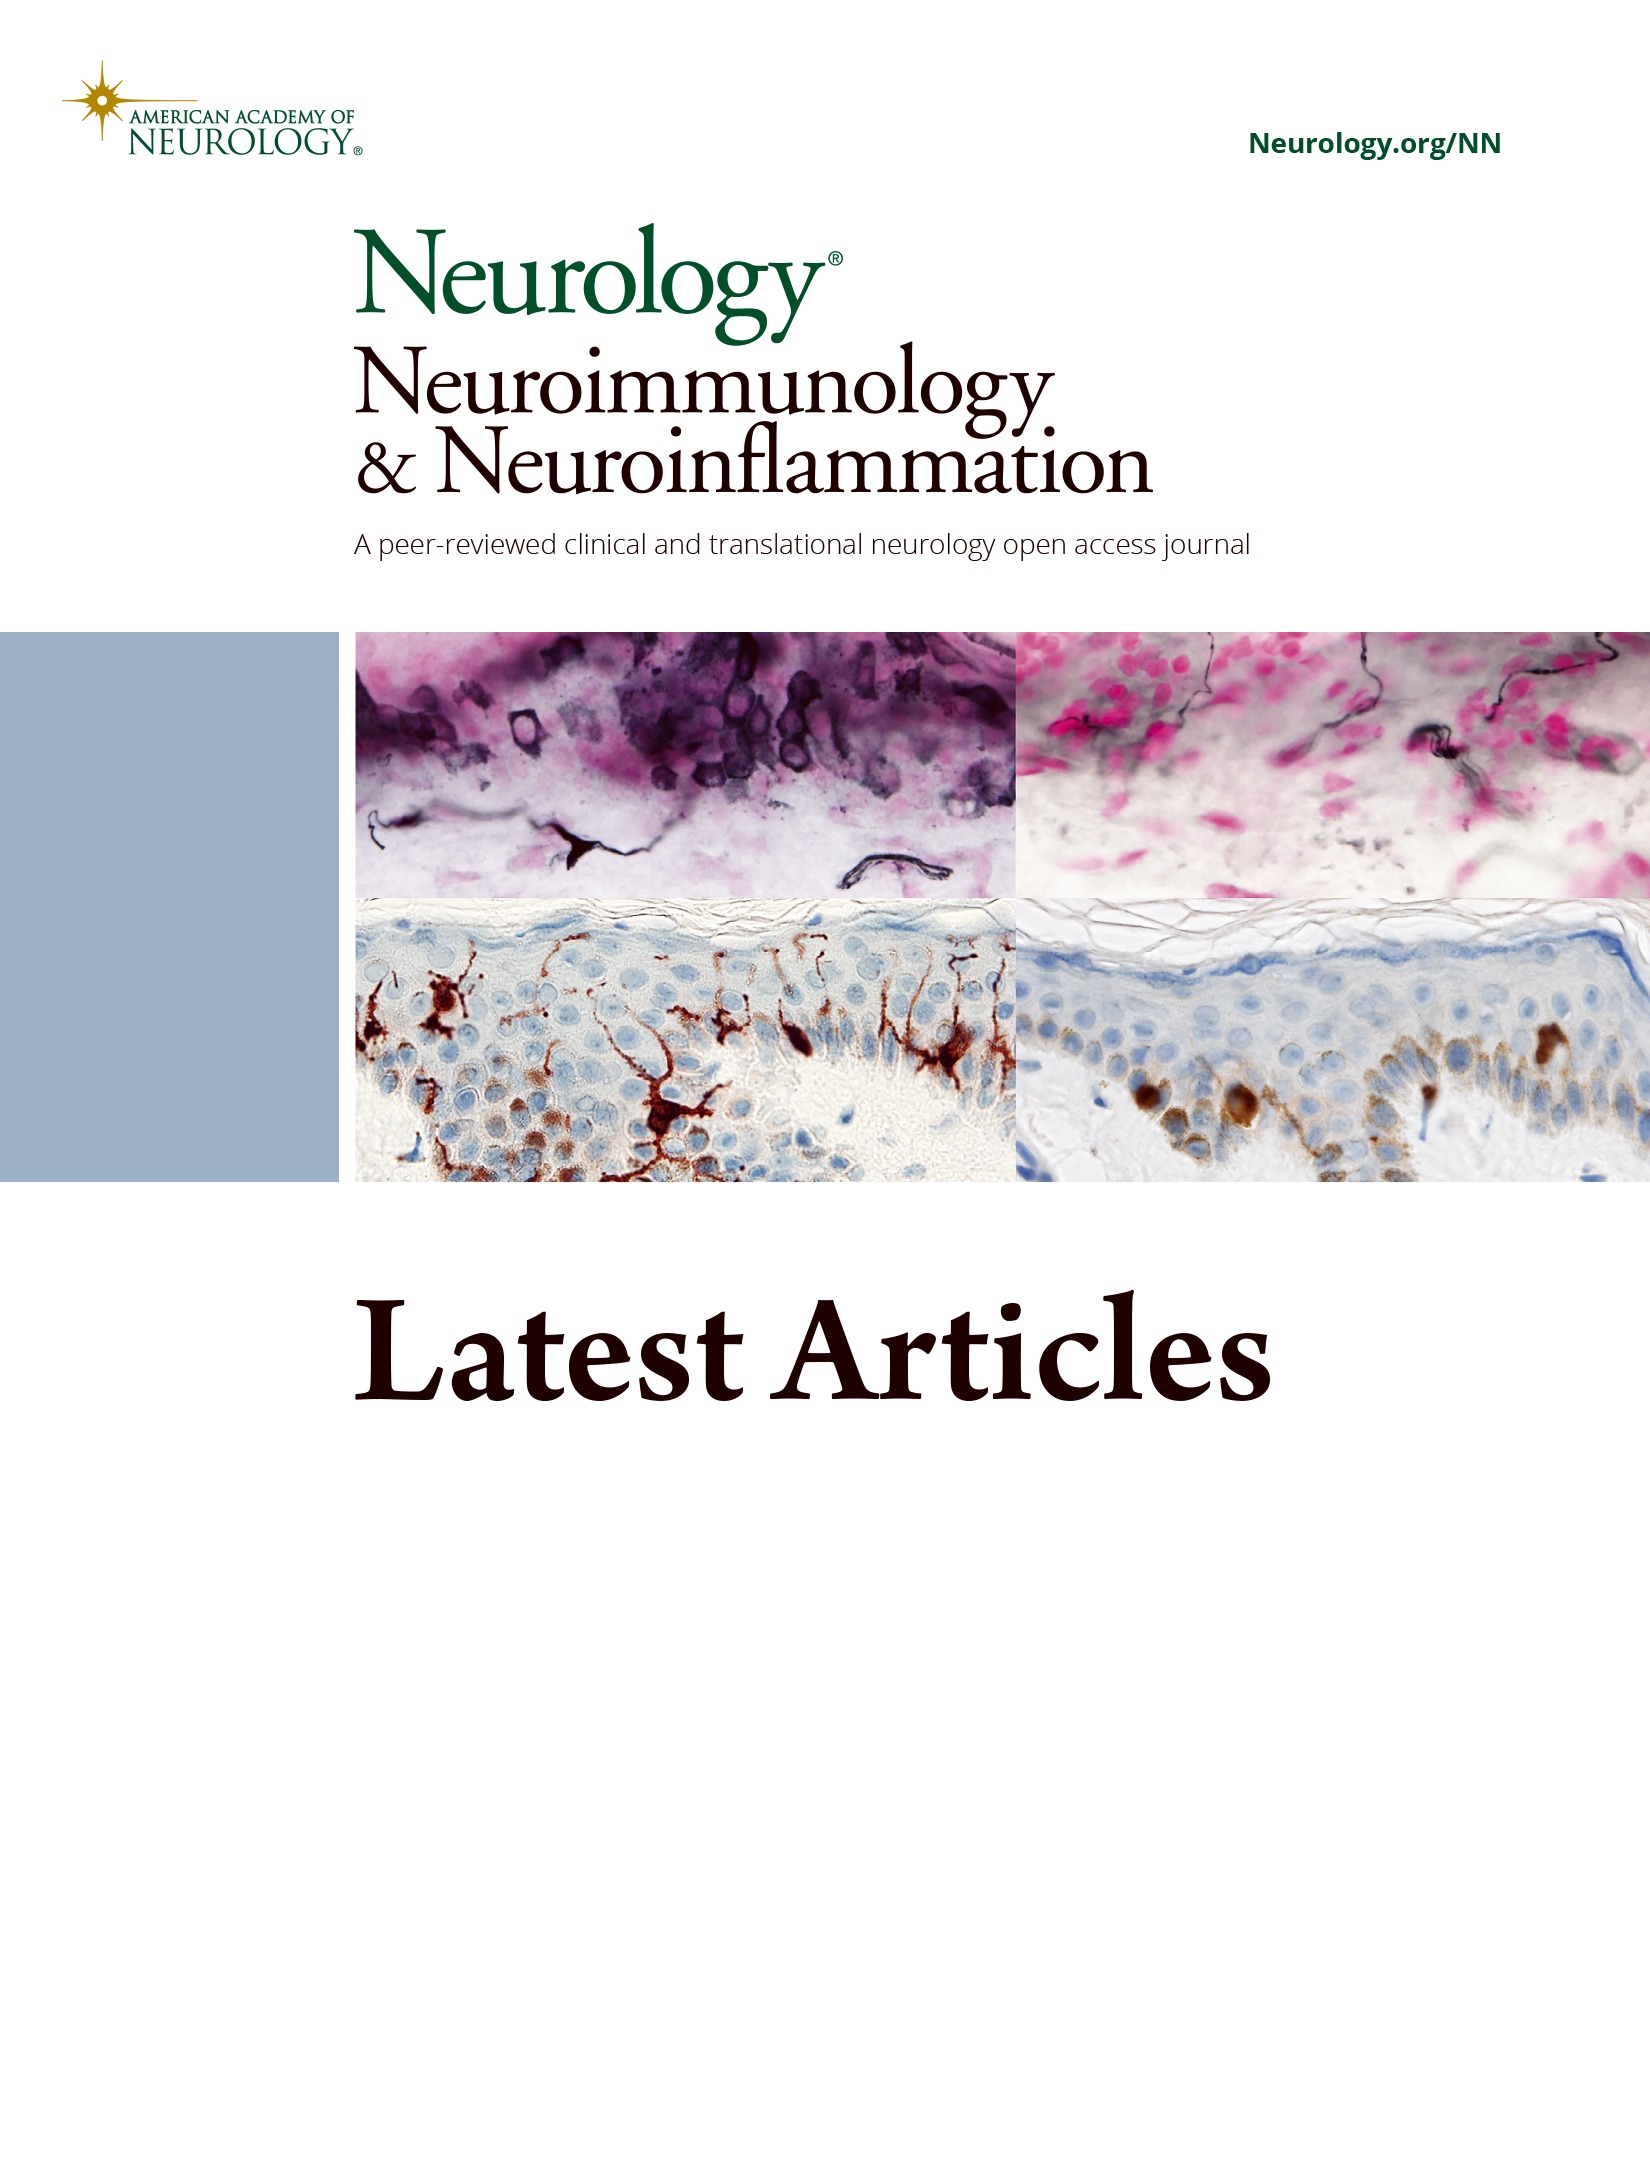 Combined Regulatory T-Lymphocyte and IL-2 Treatment Is Safe, Tolerable, and Biologically Active for 1 Year in Persons With Amyotrophic Lateral Sclerosis